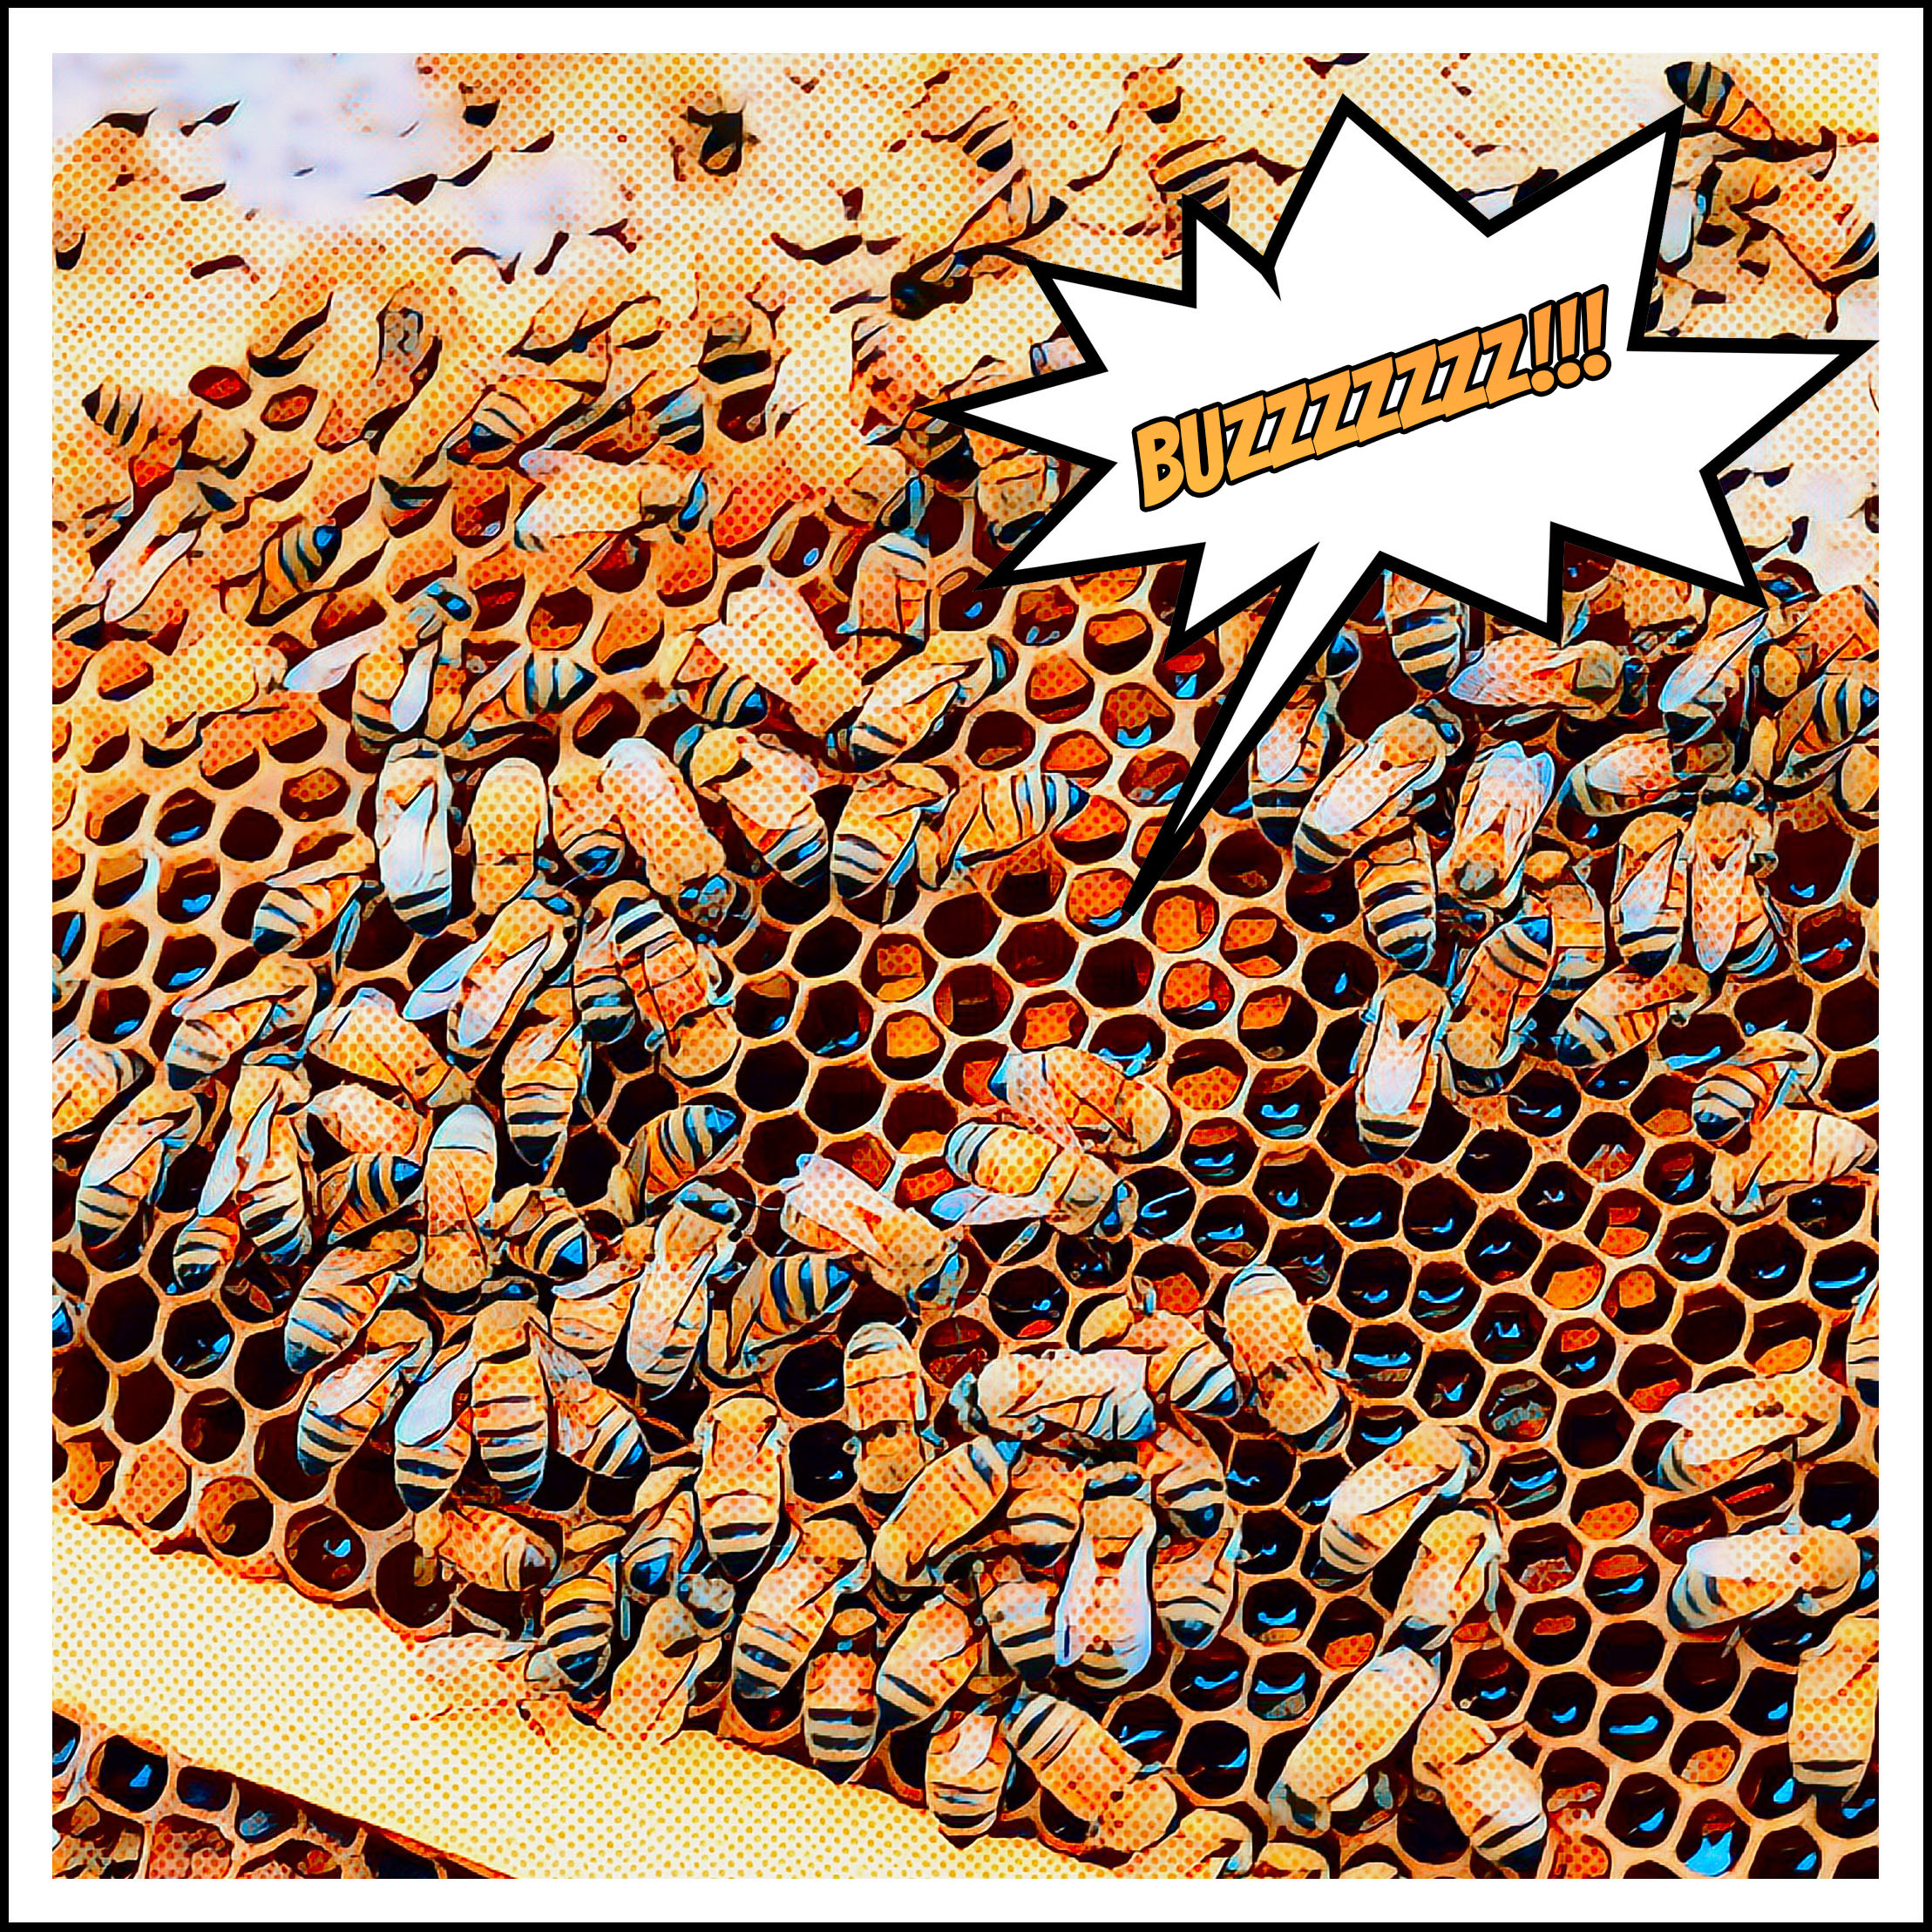 Comic style graphic of bees on a hive.